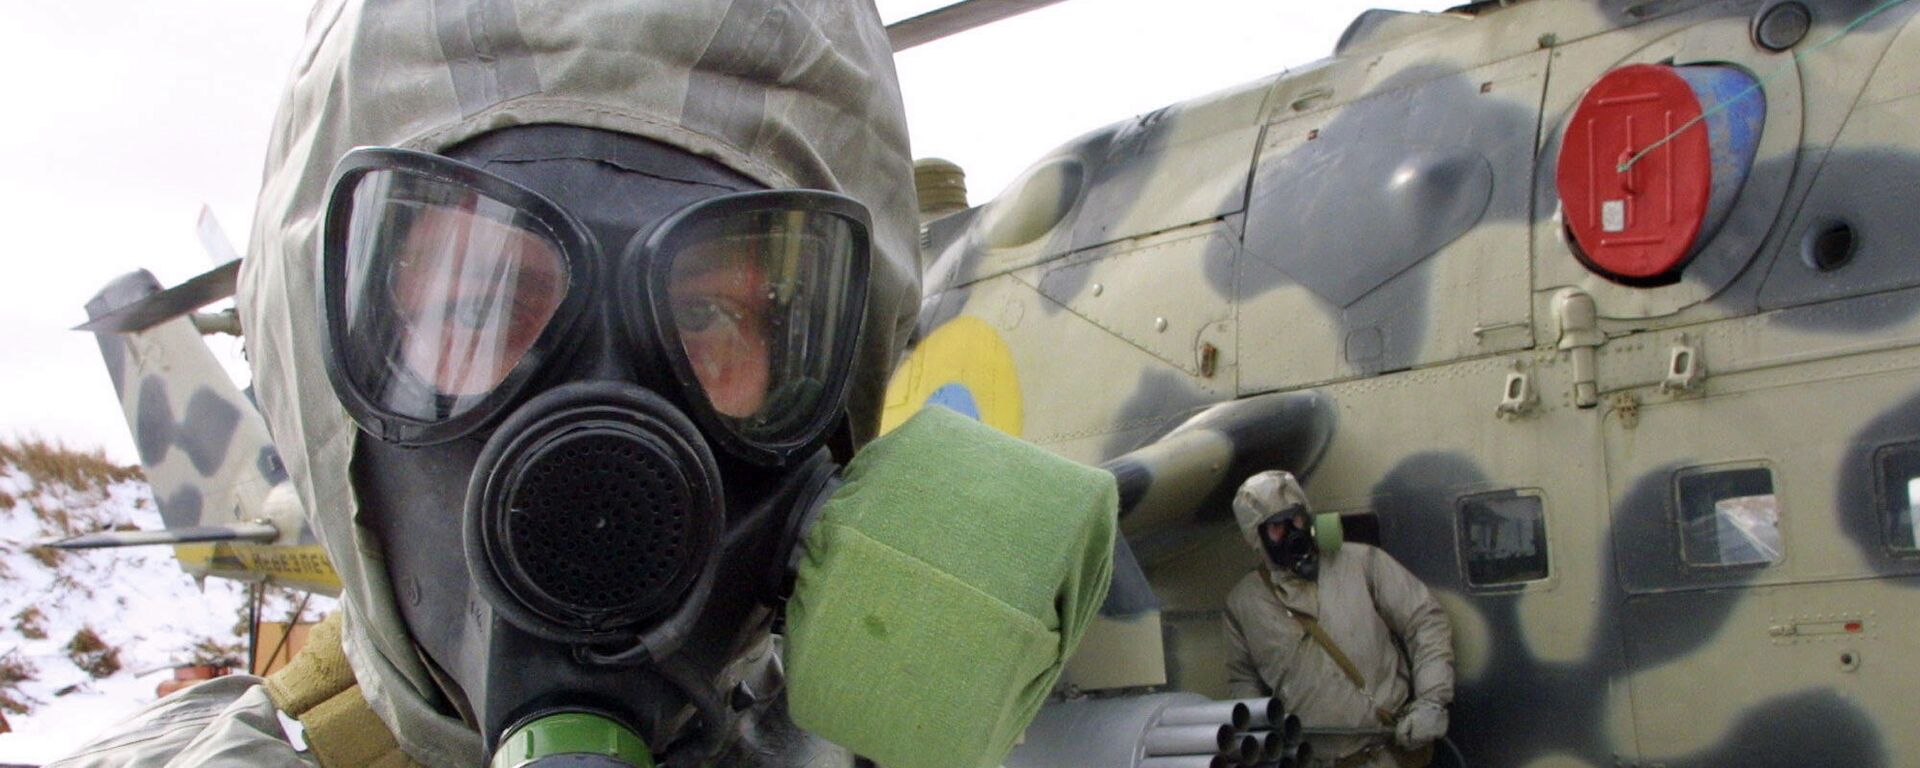 Ukrainian soldier wears a protective suit and a gas mask during exercises of Ukrainian anti-chemical weapons forces in Kalyniv, 620 kilometers (390 miles) west of Kiev, Ukraine,  Friday, March 14, 2003 - Sputnik International, 1920, 21.12.2021